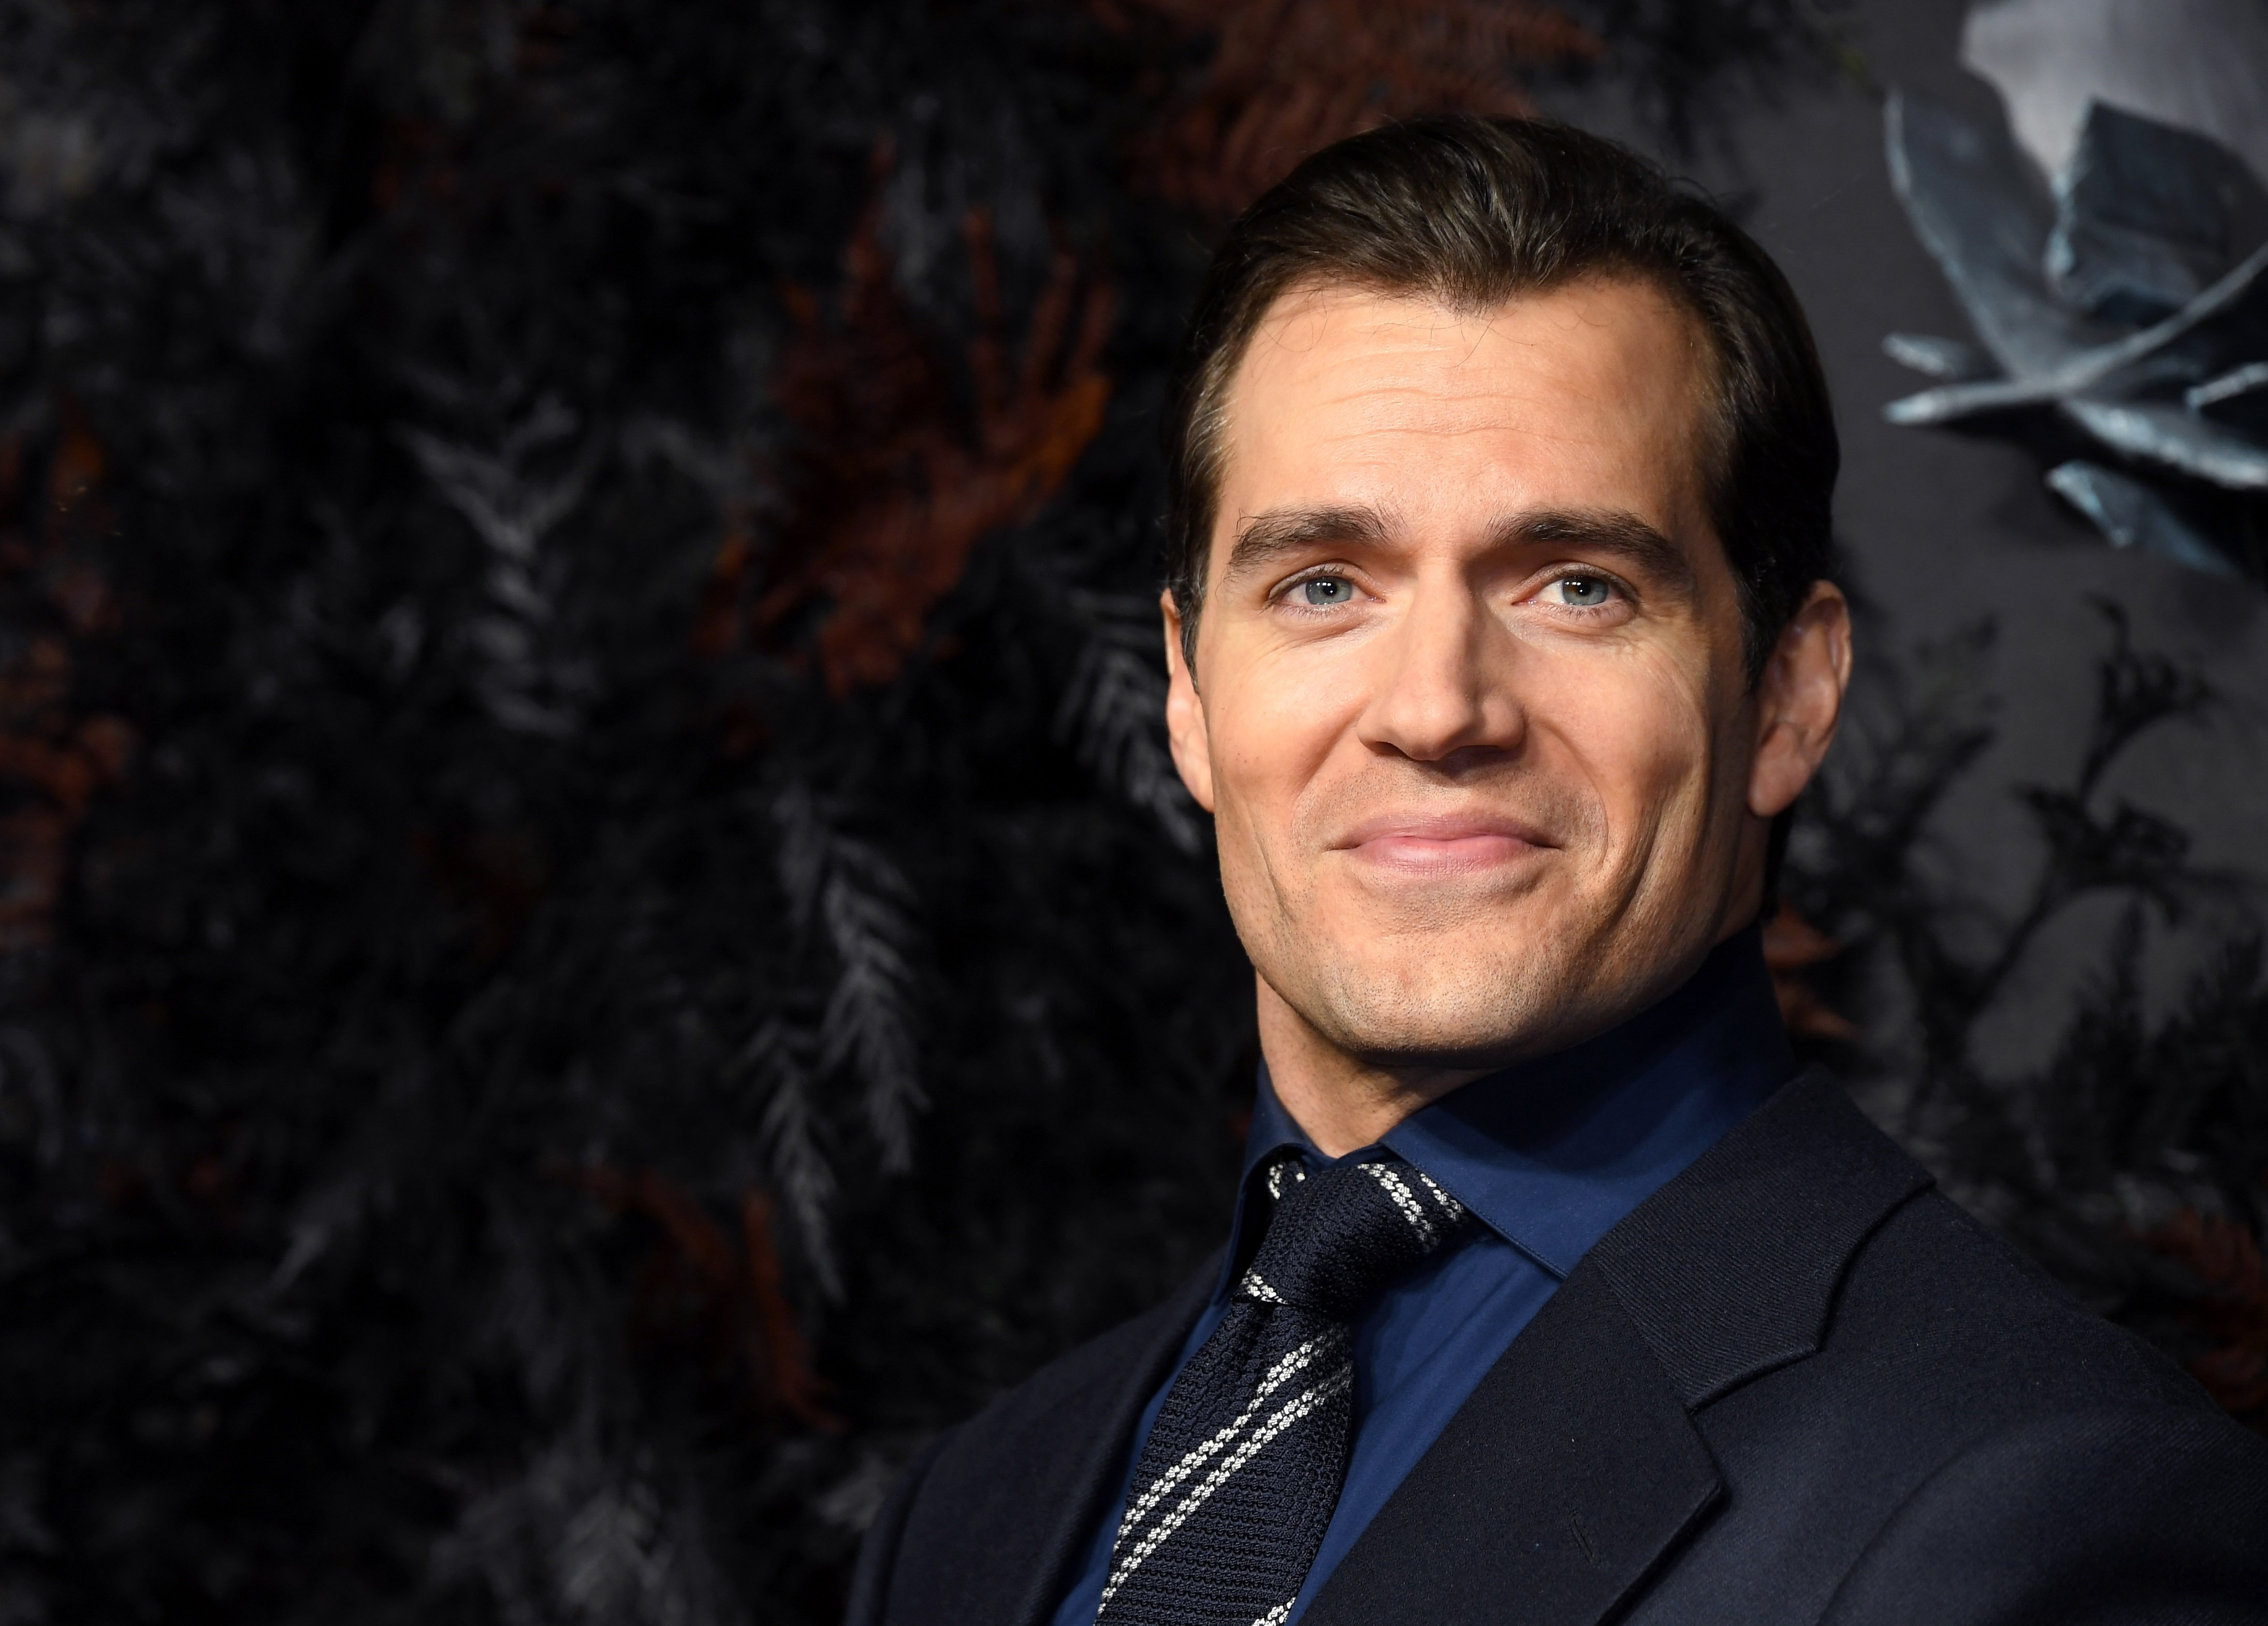 'Superman' actor Henry Cavill wears a black suit over a blue shirt and white striped blue tie.